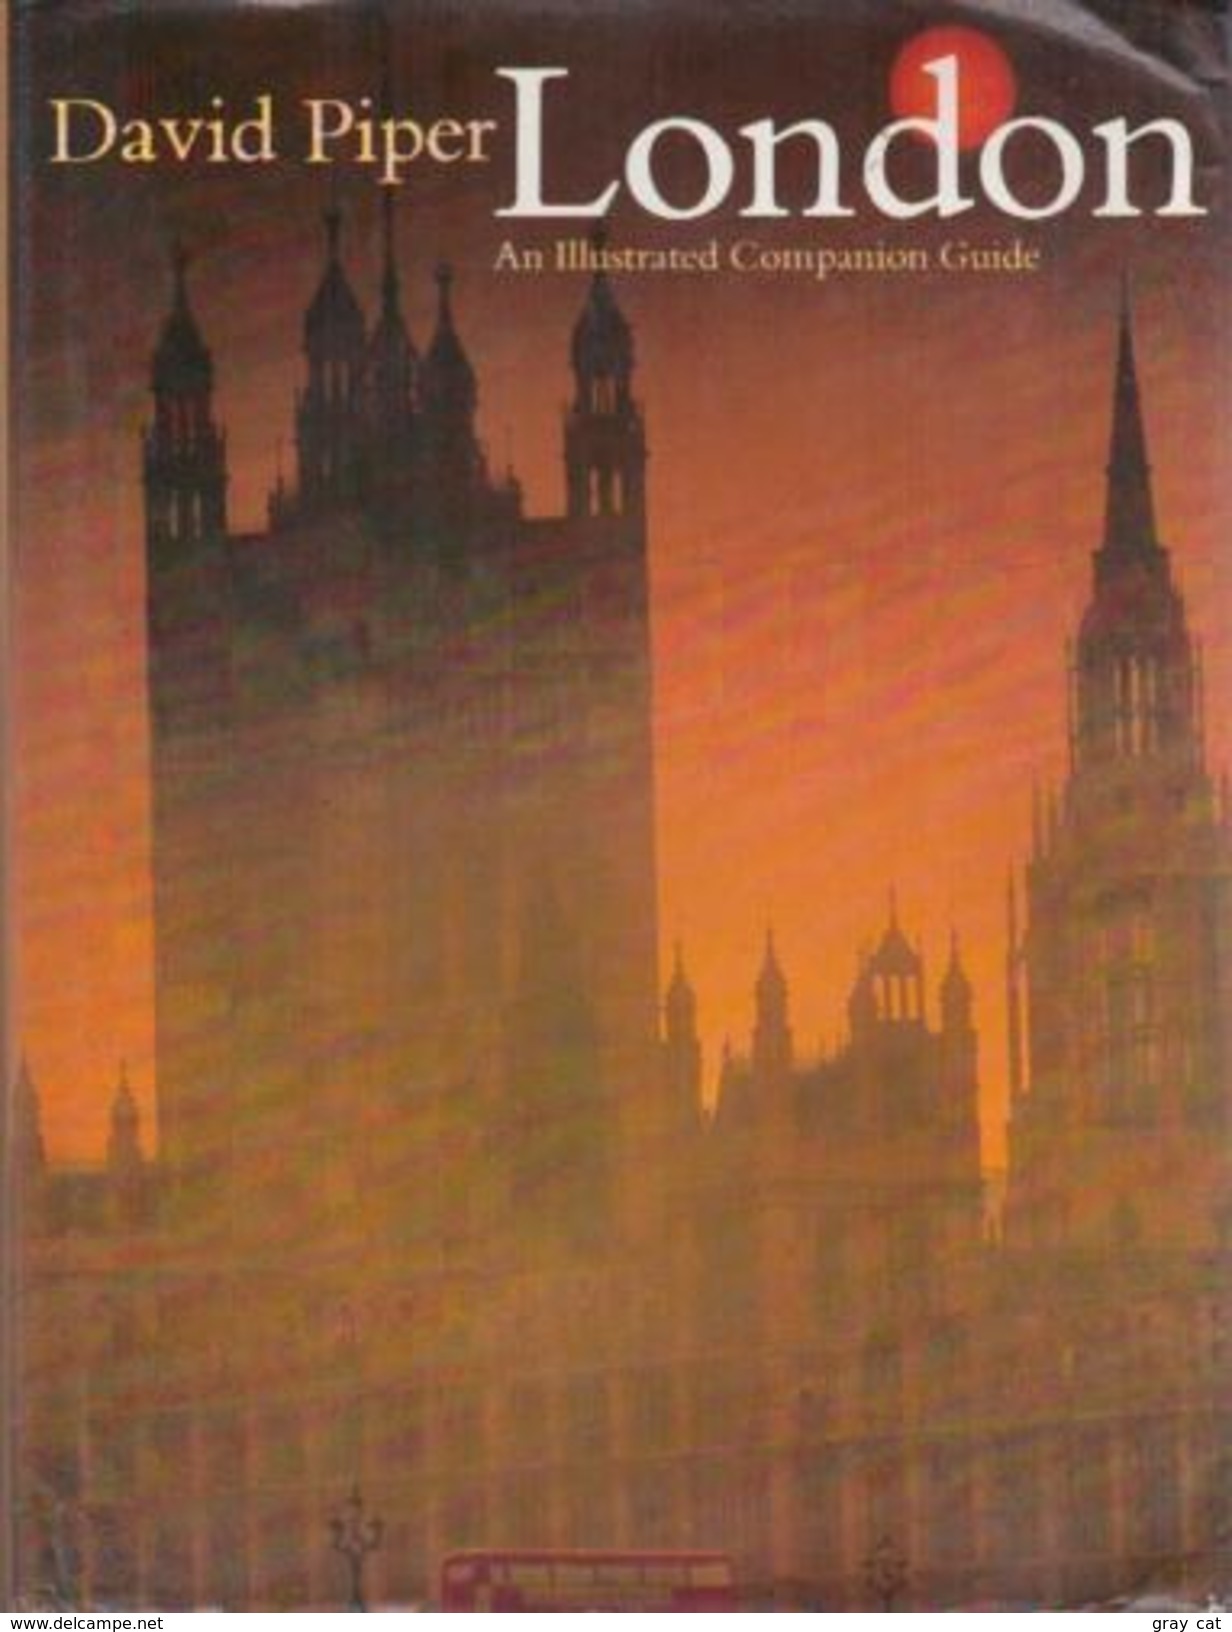 London An Illustrated Companion Guide By Piper, David (ISBN 9780002162876) - Travel/ Exploration